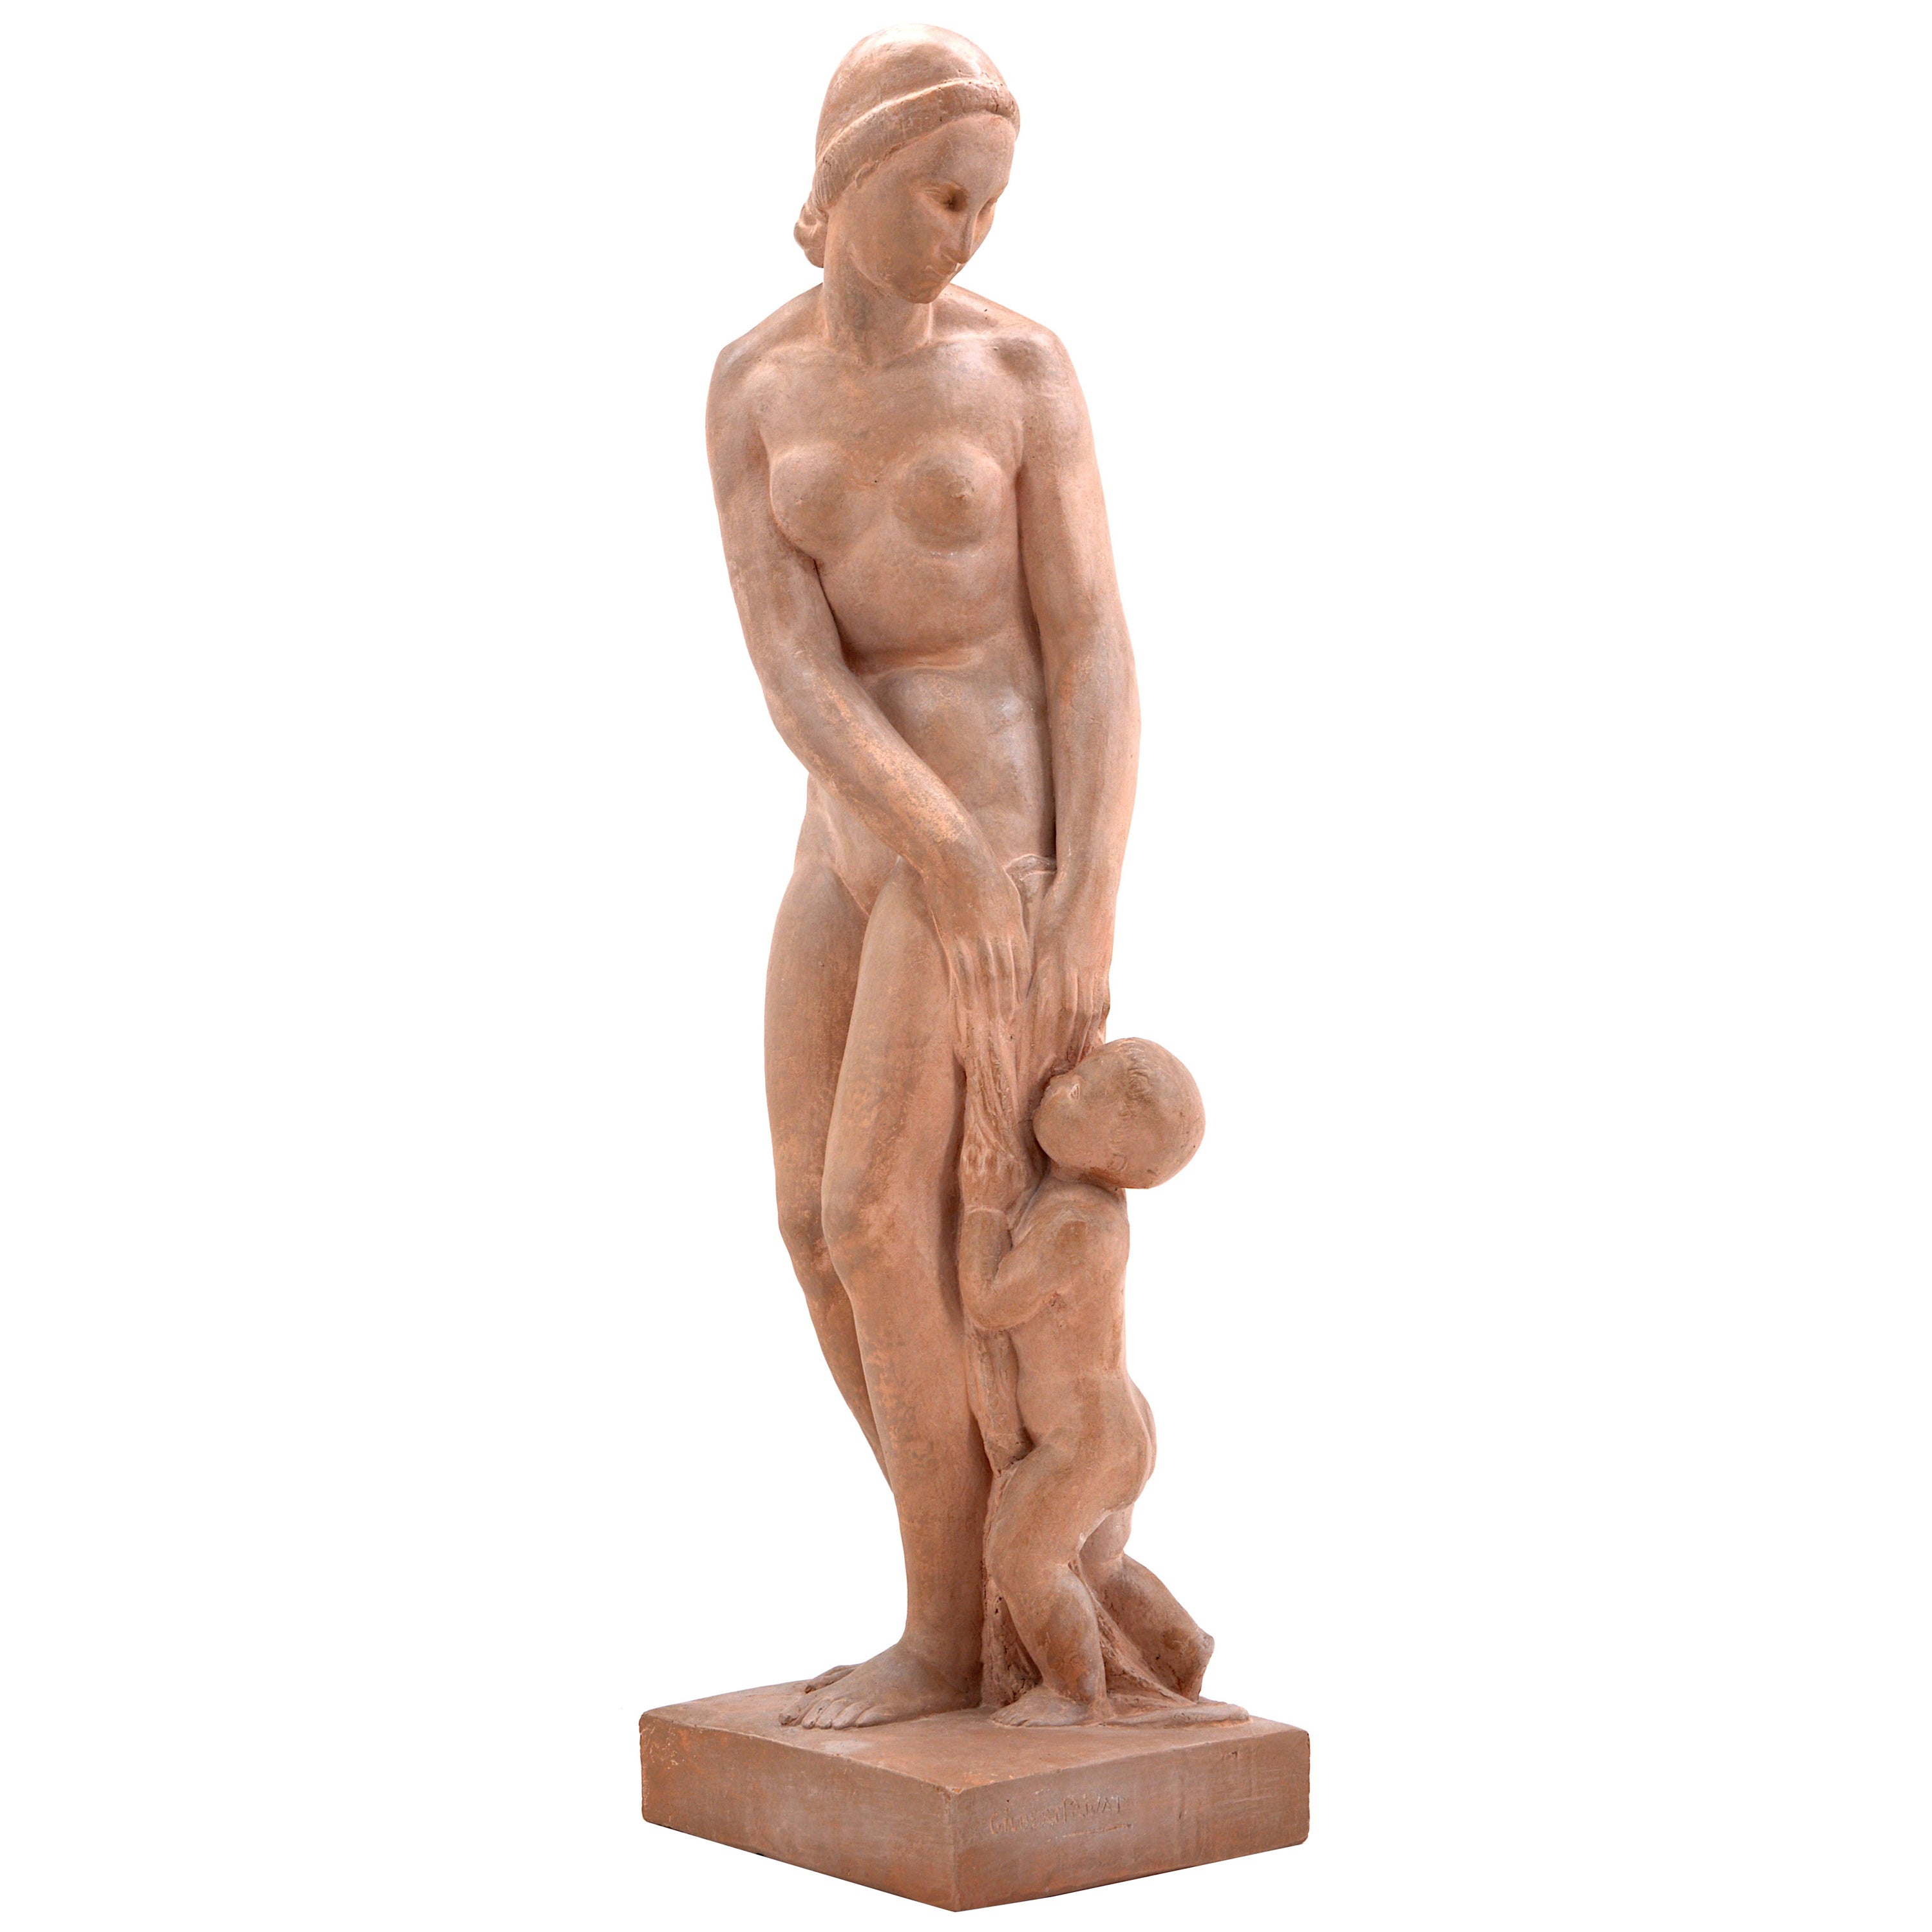 Gilbert Privat, French Art Deco Bather with Child, Terracotta Sculpture, 1920s